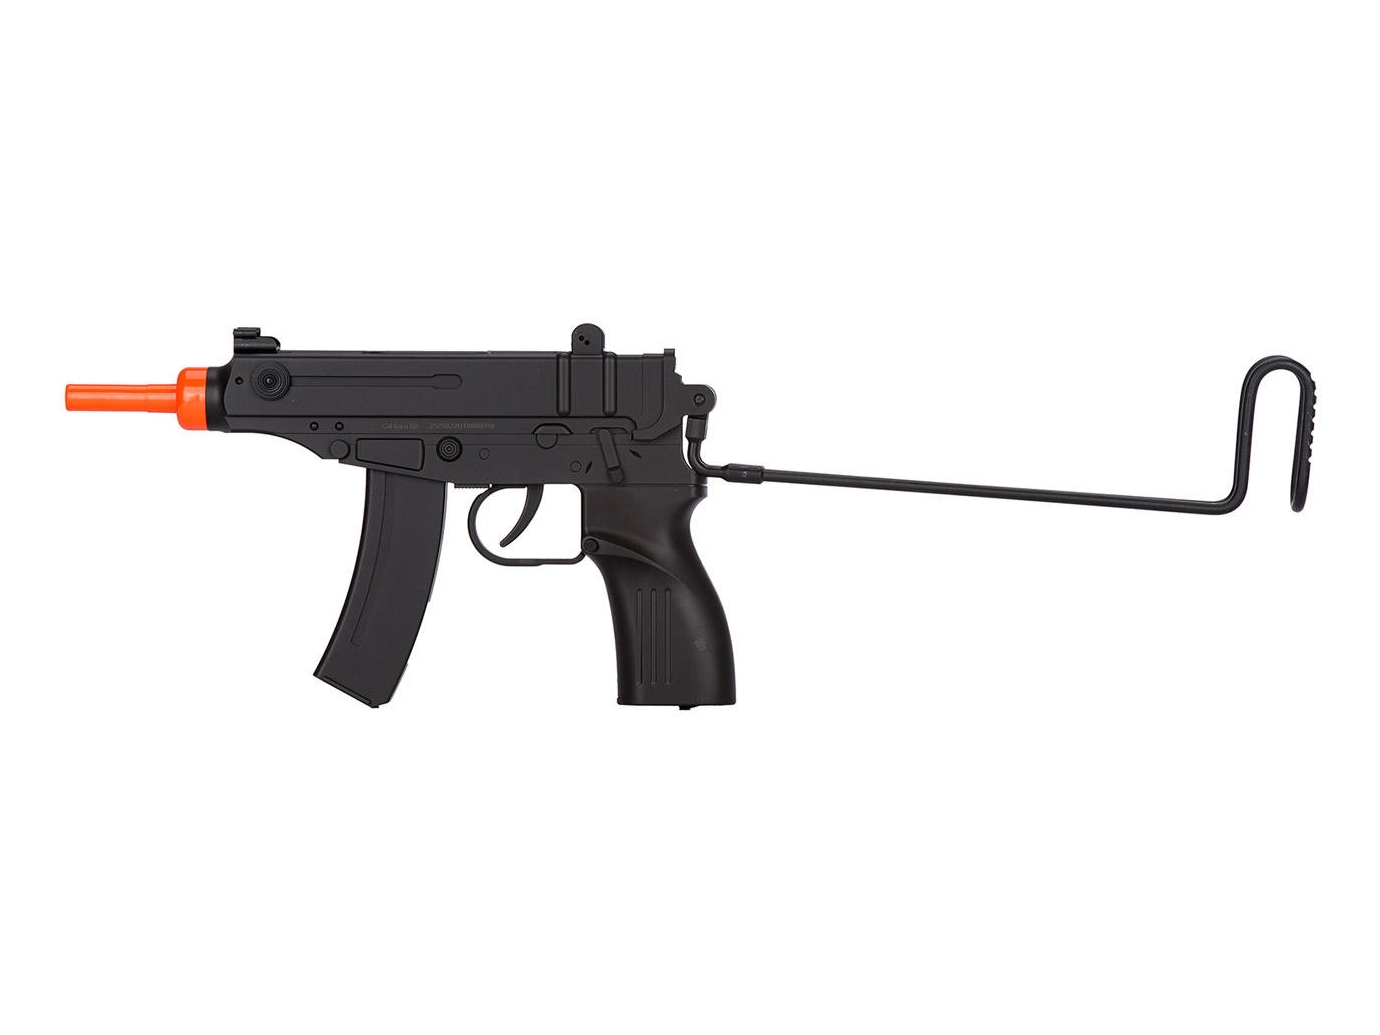 Well VZ61 Scorpion CO2 Airsoft SMG